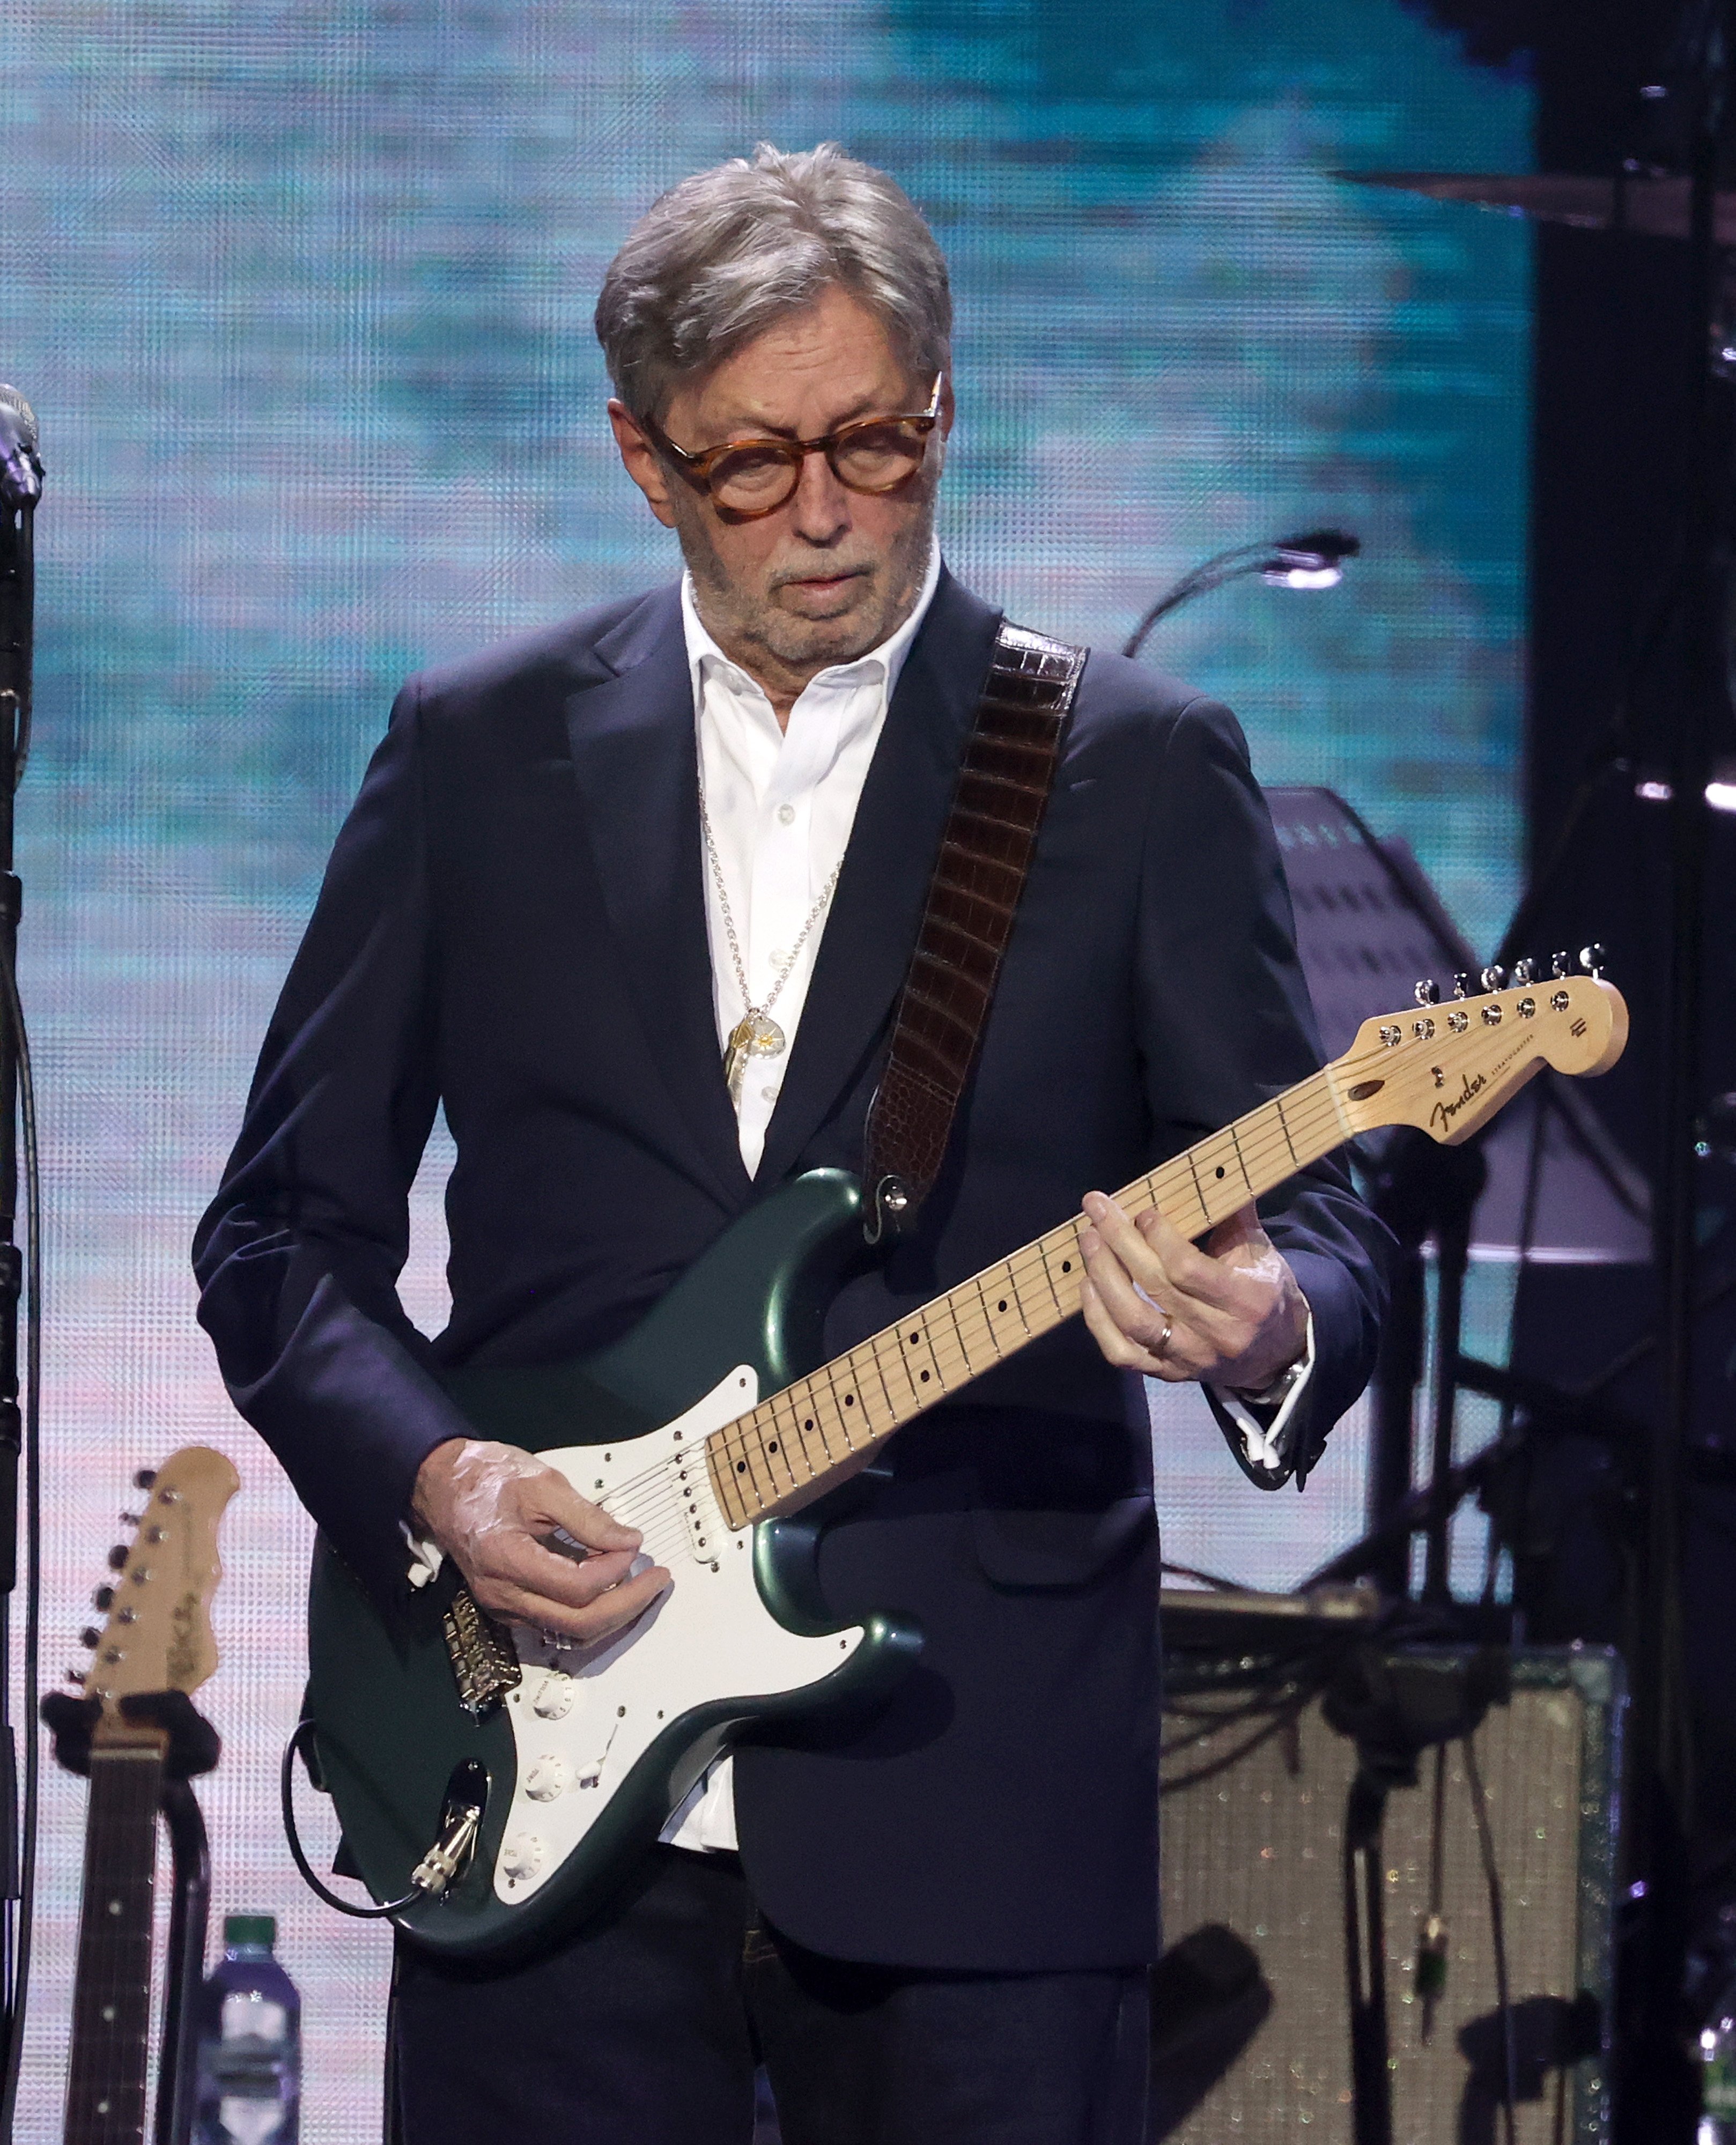 Eric Clapton performing at The O2 Arena on March 03, 2020, in London, England | Source: Getty Images